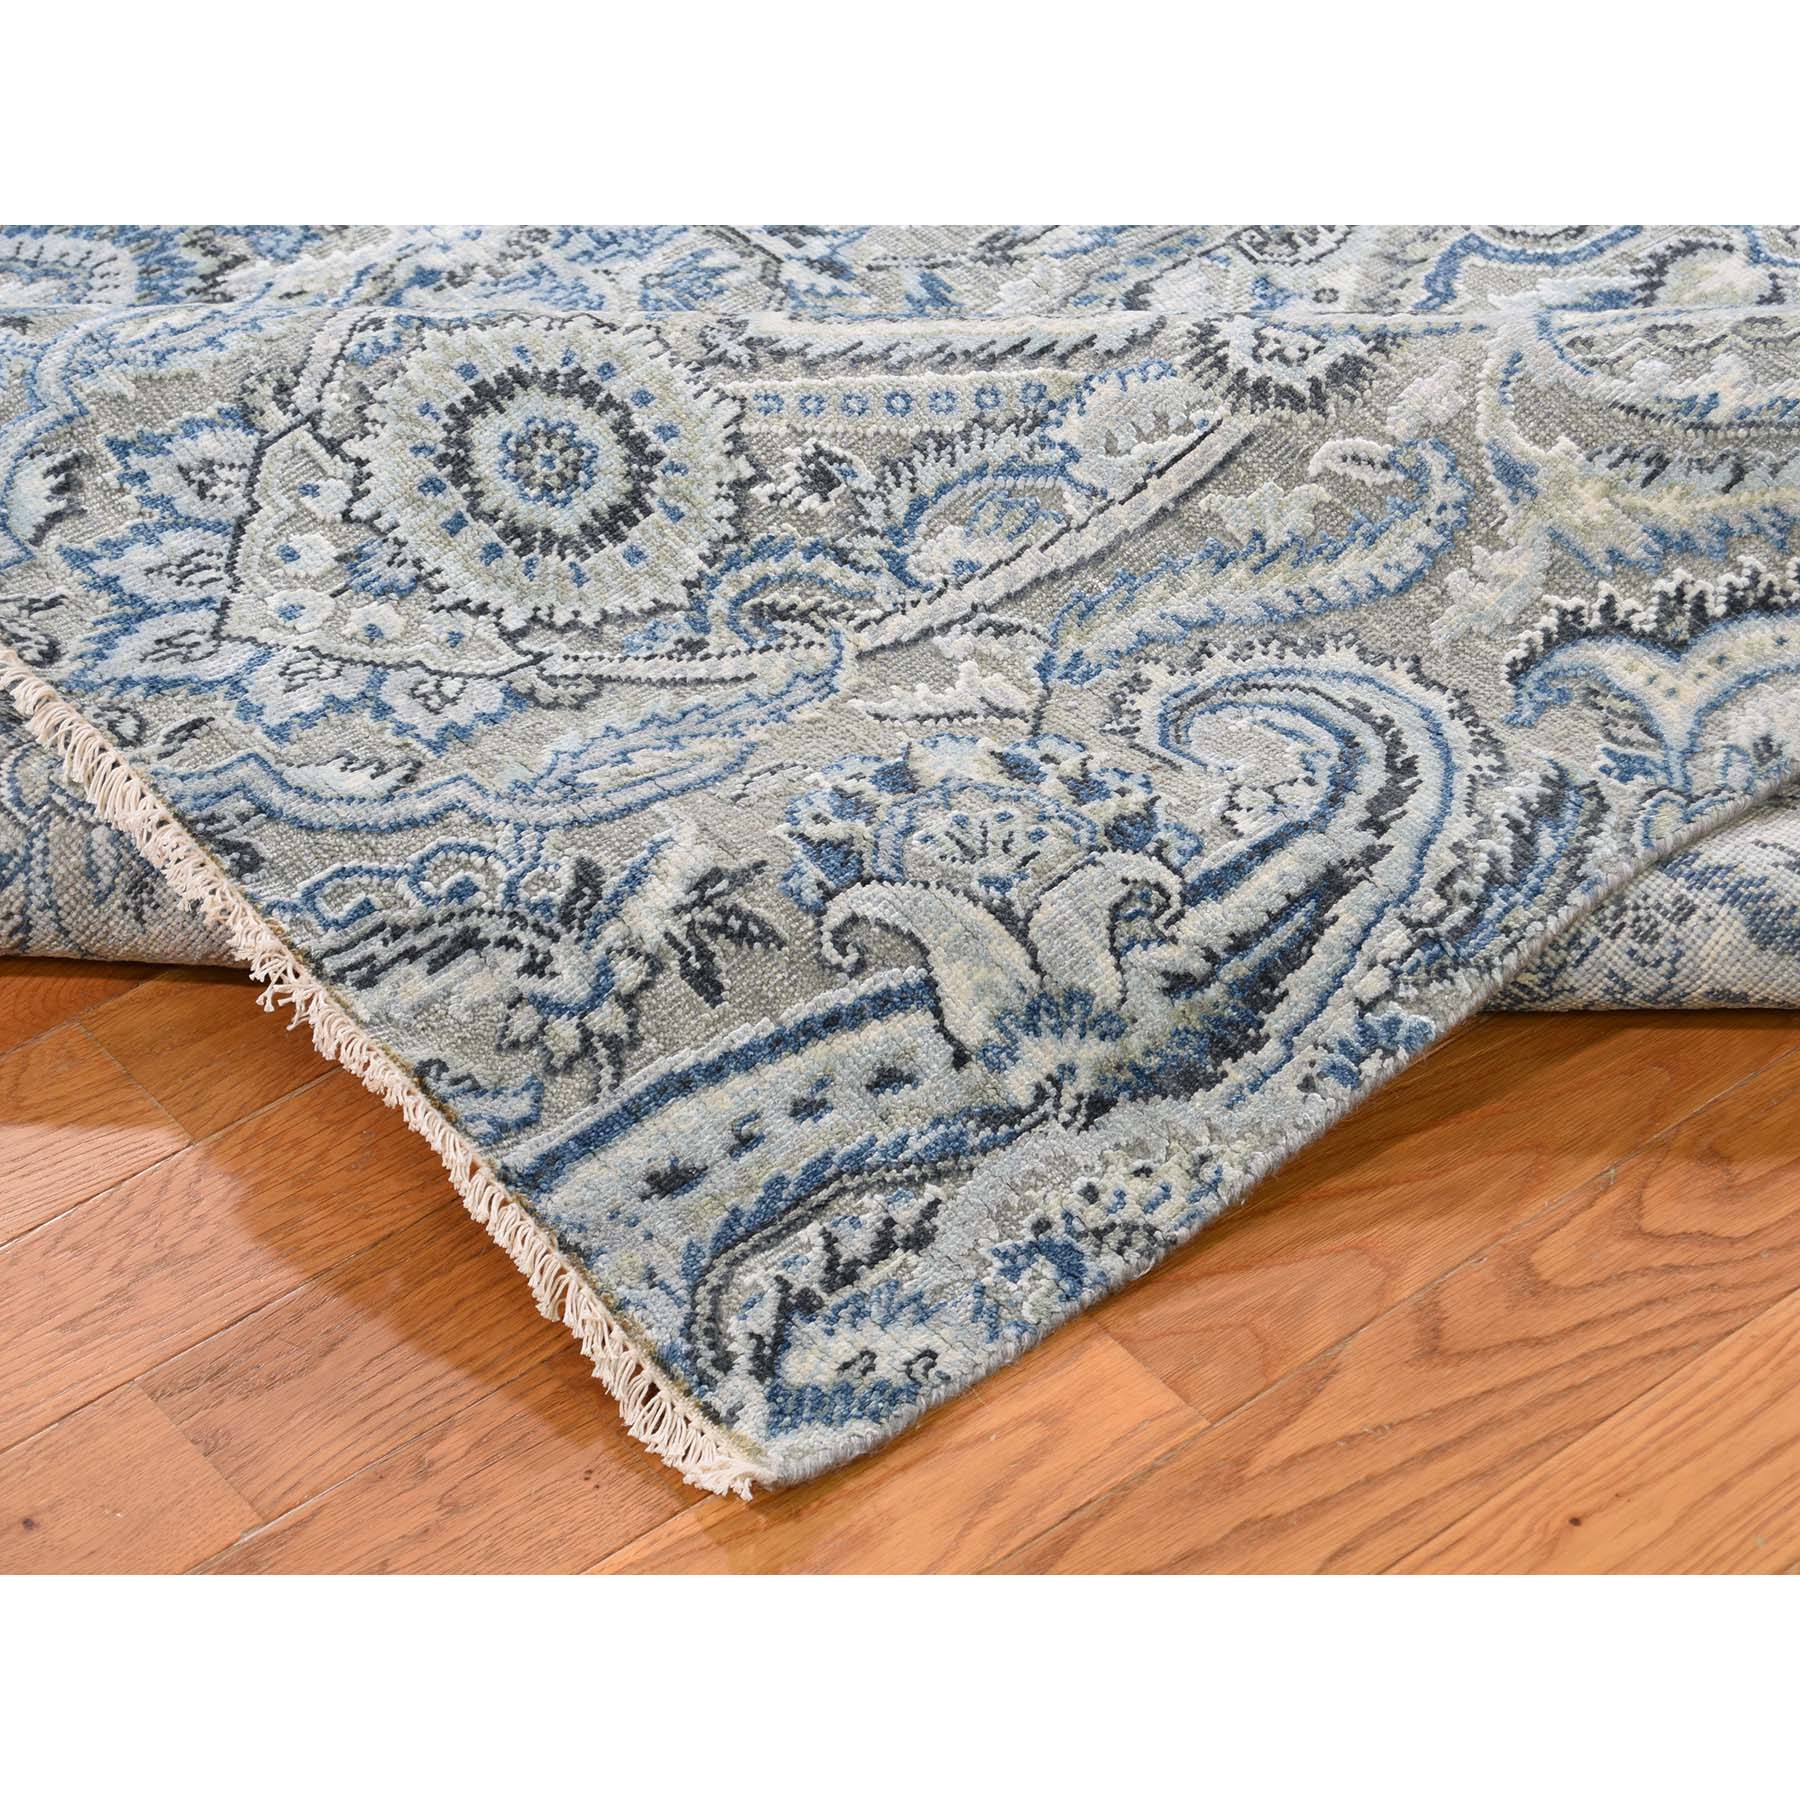 9-x12-1  Pure Silk Textured Wool Paisley Flower Design Hand-Knotted Rug 